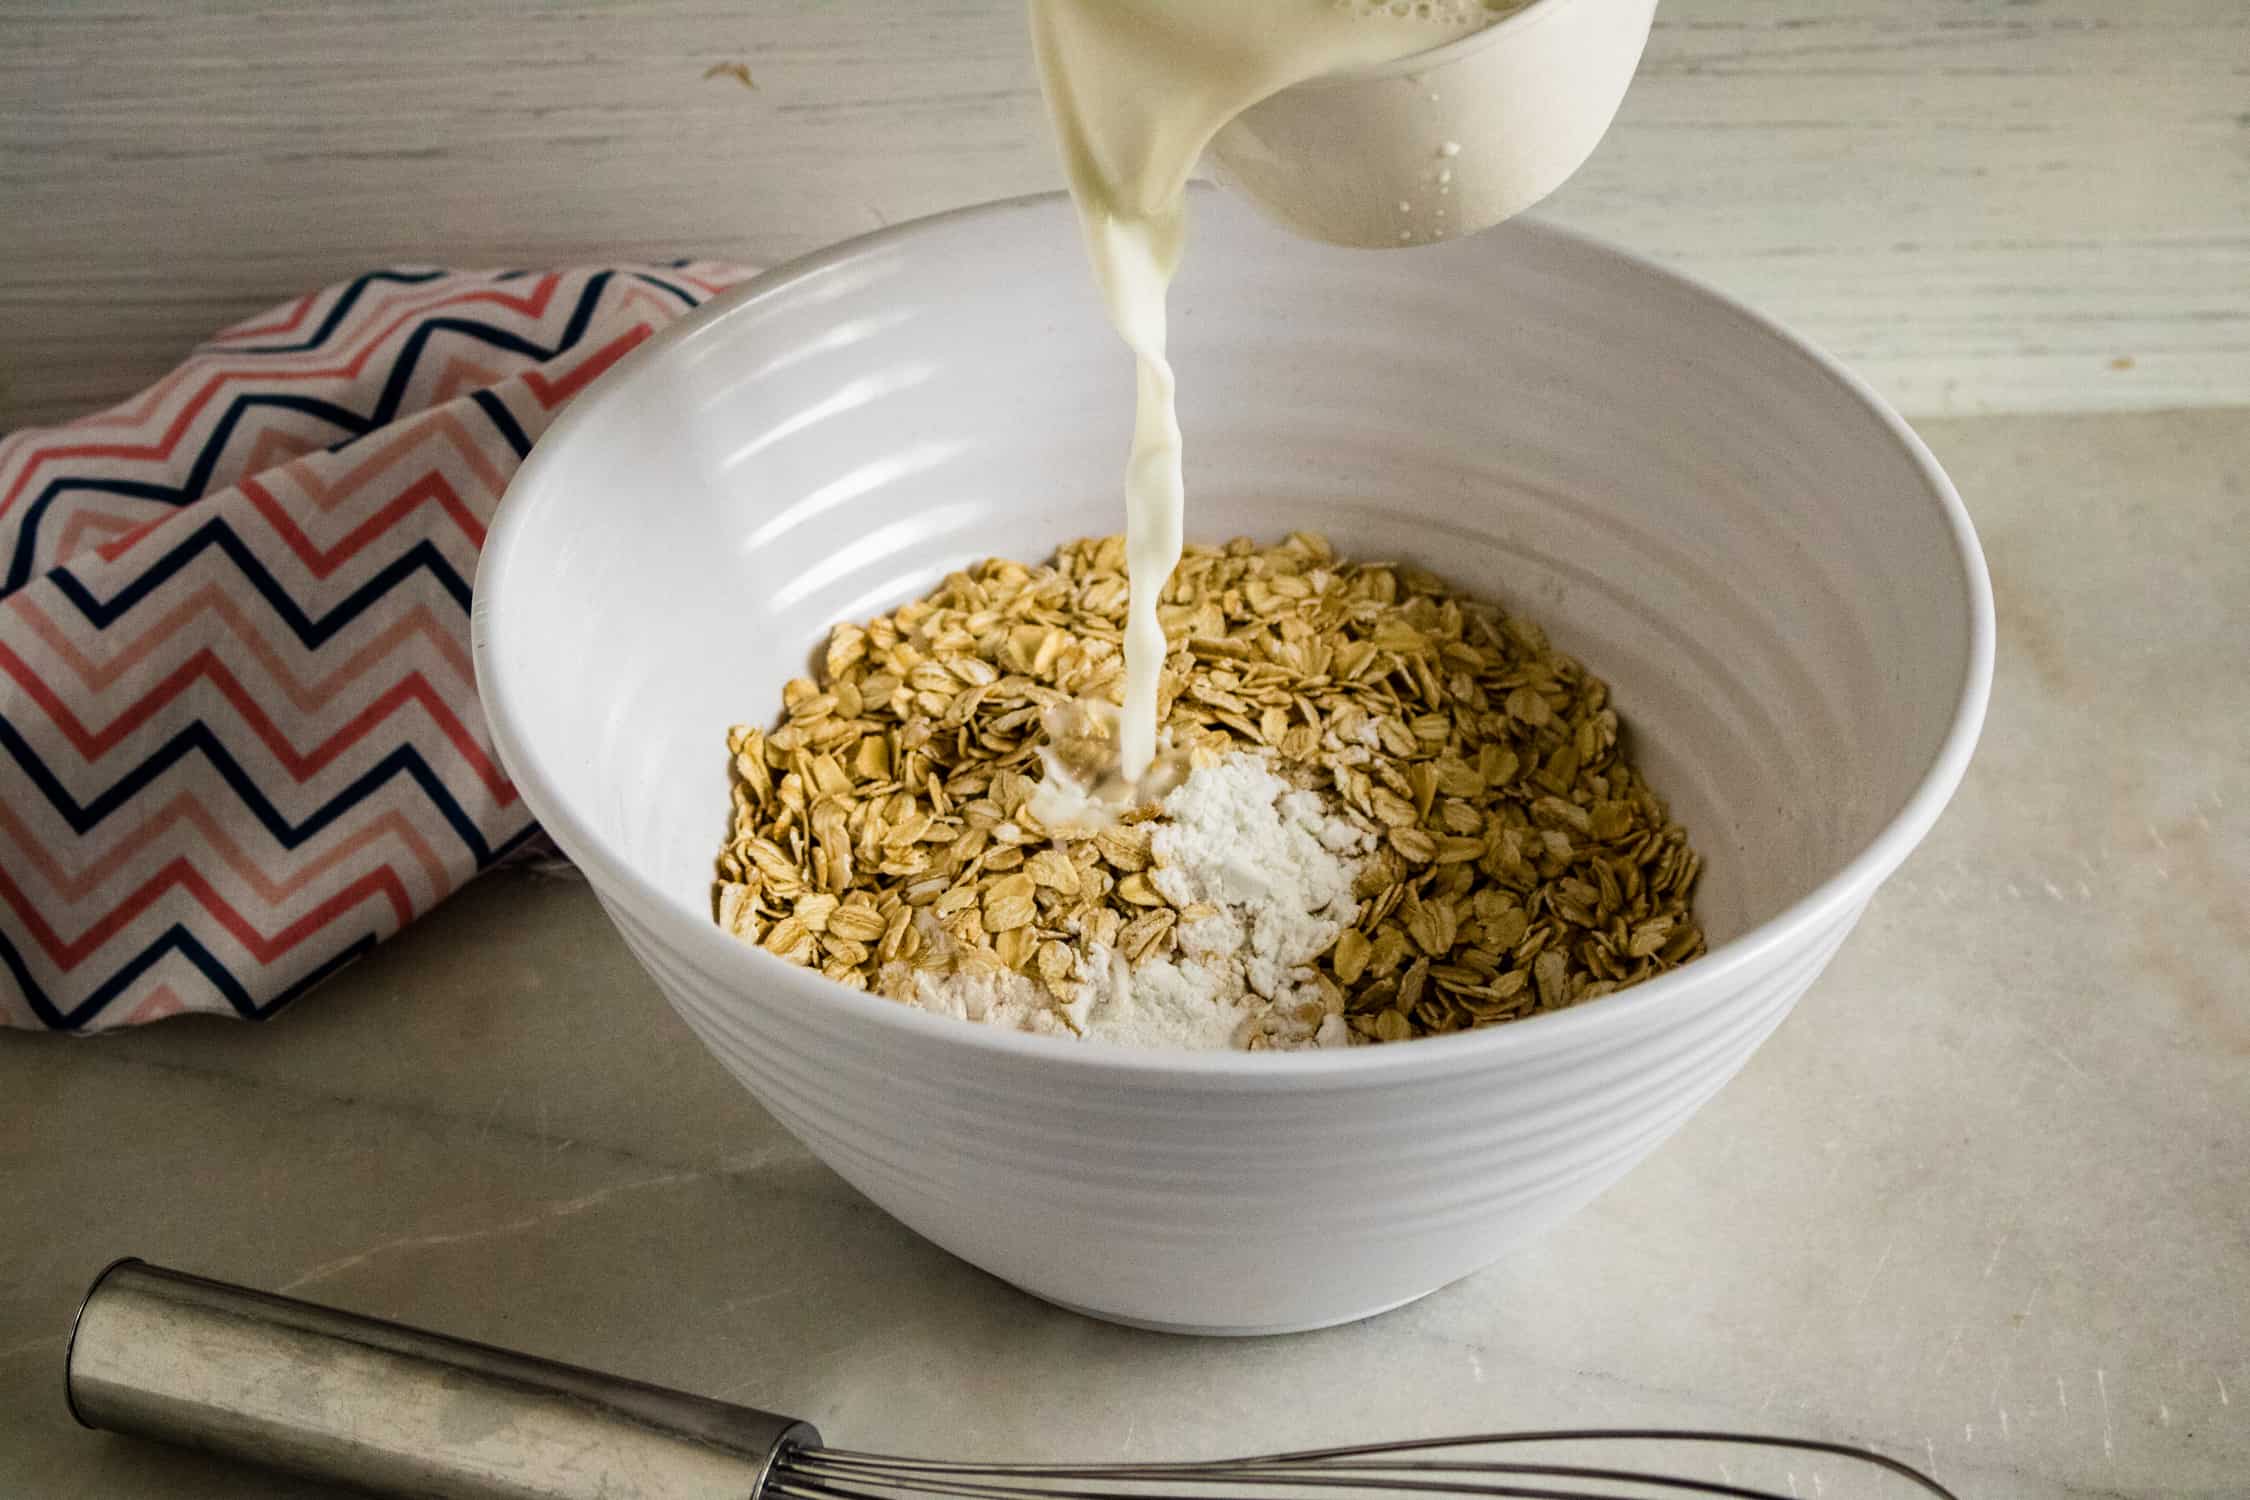 white ceramic bowl holding oats for Chocolate Chocolate Chip Oatmeal Muffins with milk being poured in from a white pitcher with silver whisk in foreground and zig zag print napkin to the left